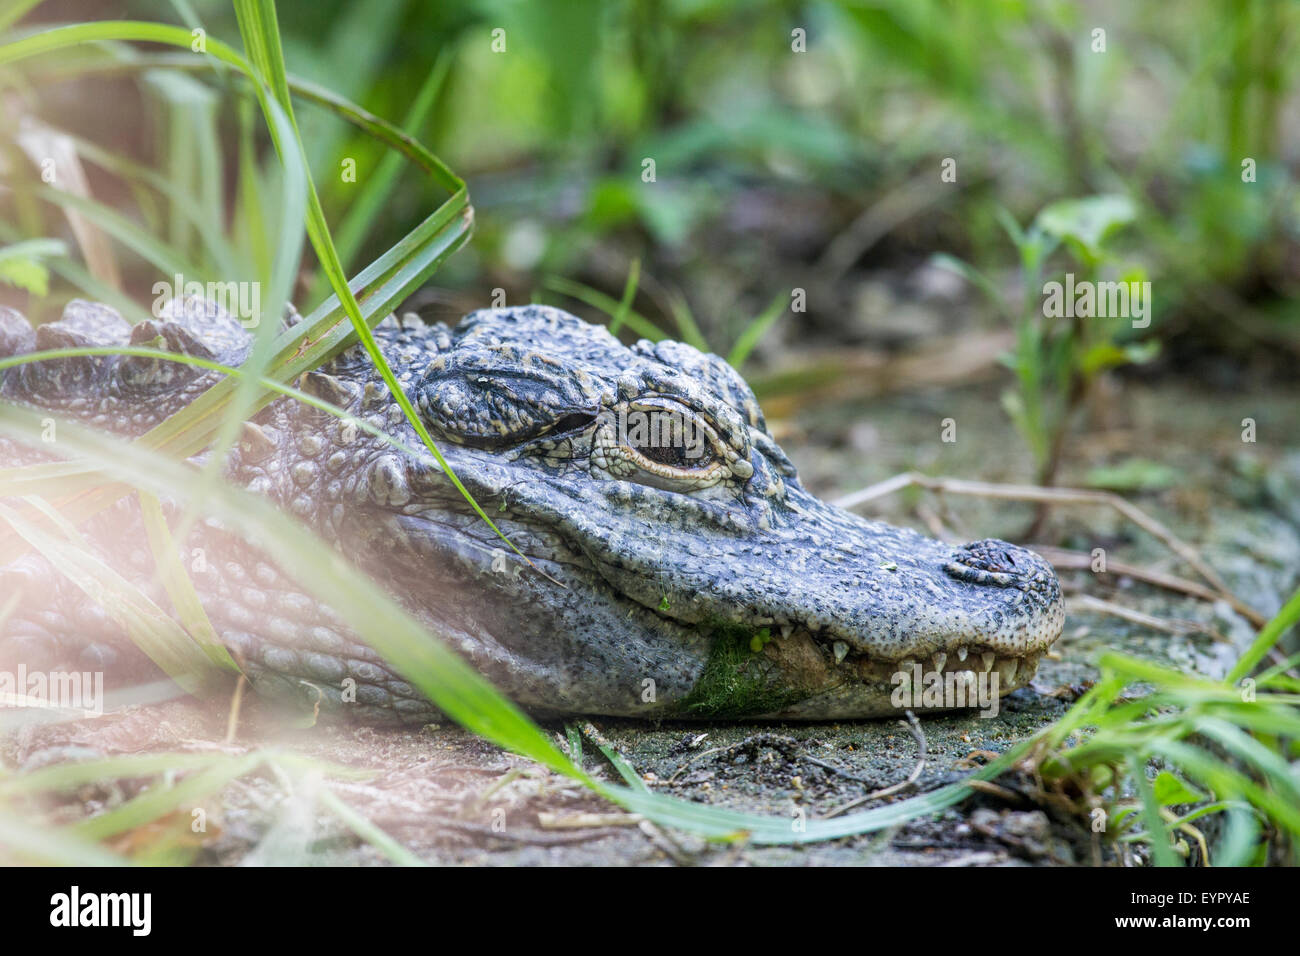 A small chinese alligator, Alligator sinensis, is resting between the vegetation near a pond Stock Photo